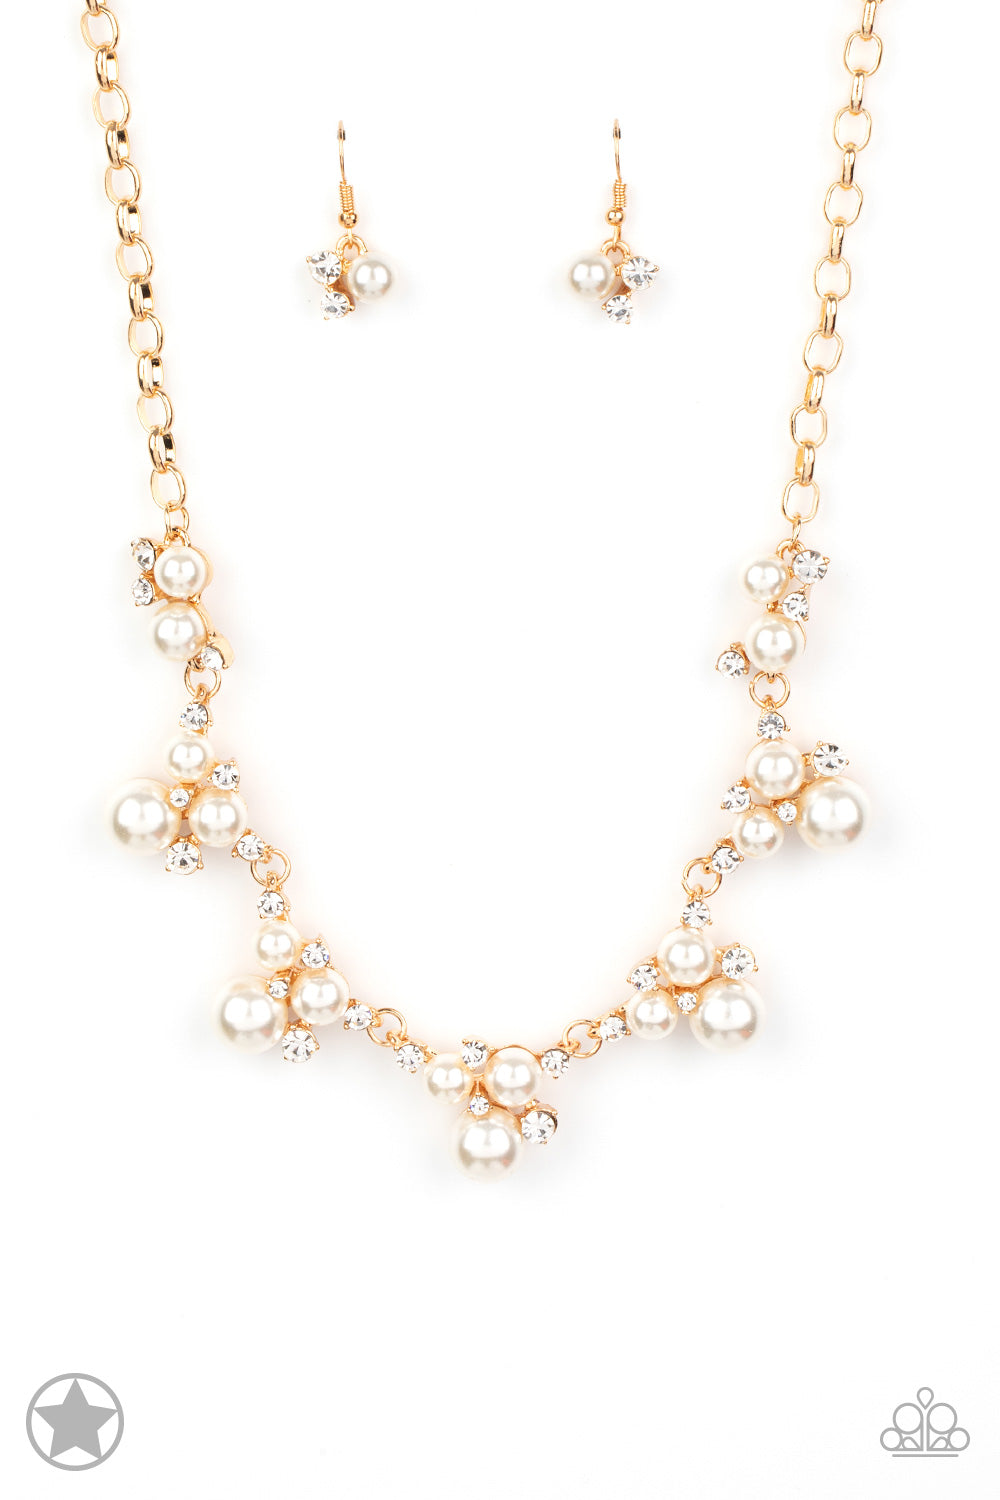 Paparazzi Toast To Perfection Gold Short Blockbuster Necklace - P2RE-GDWT-113XX